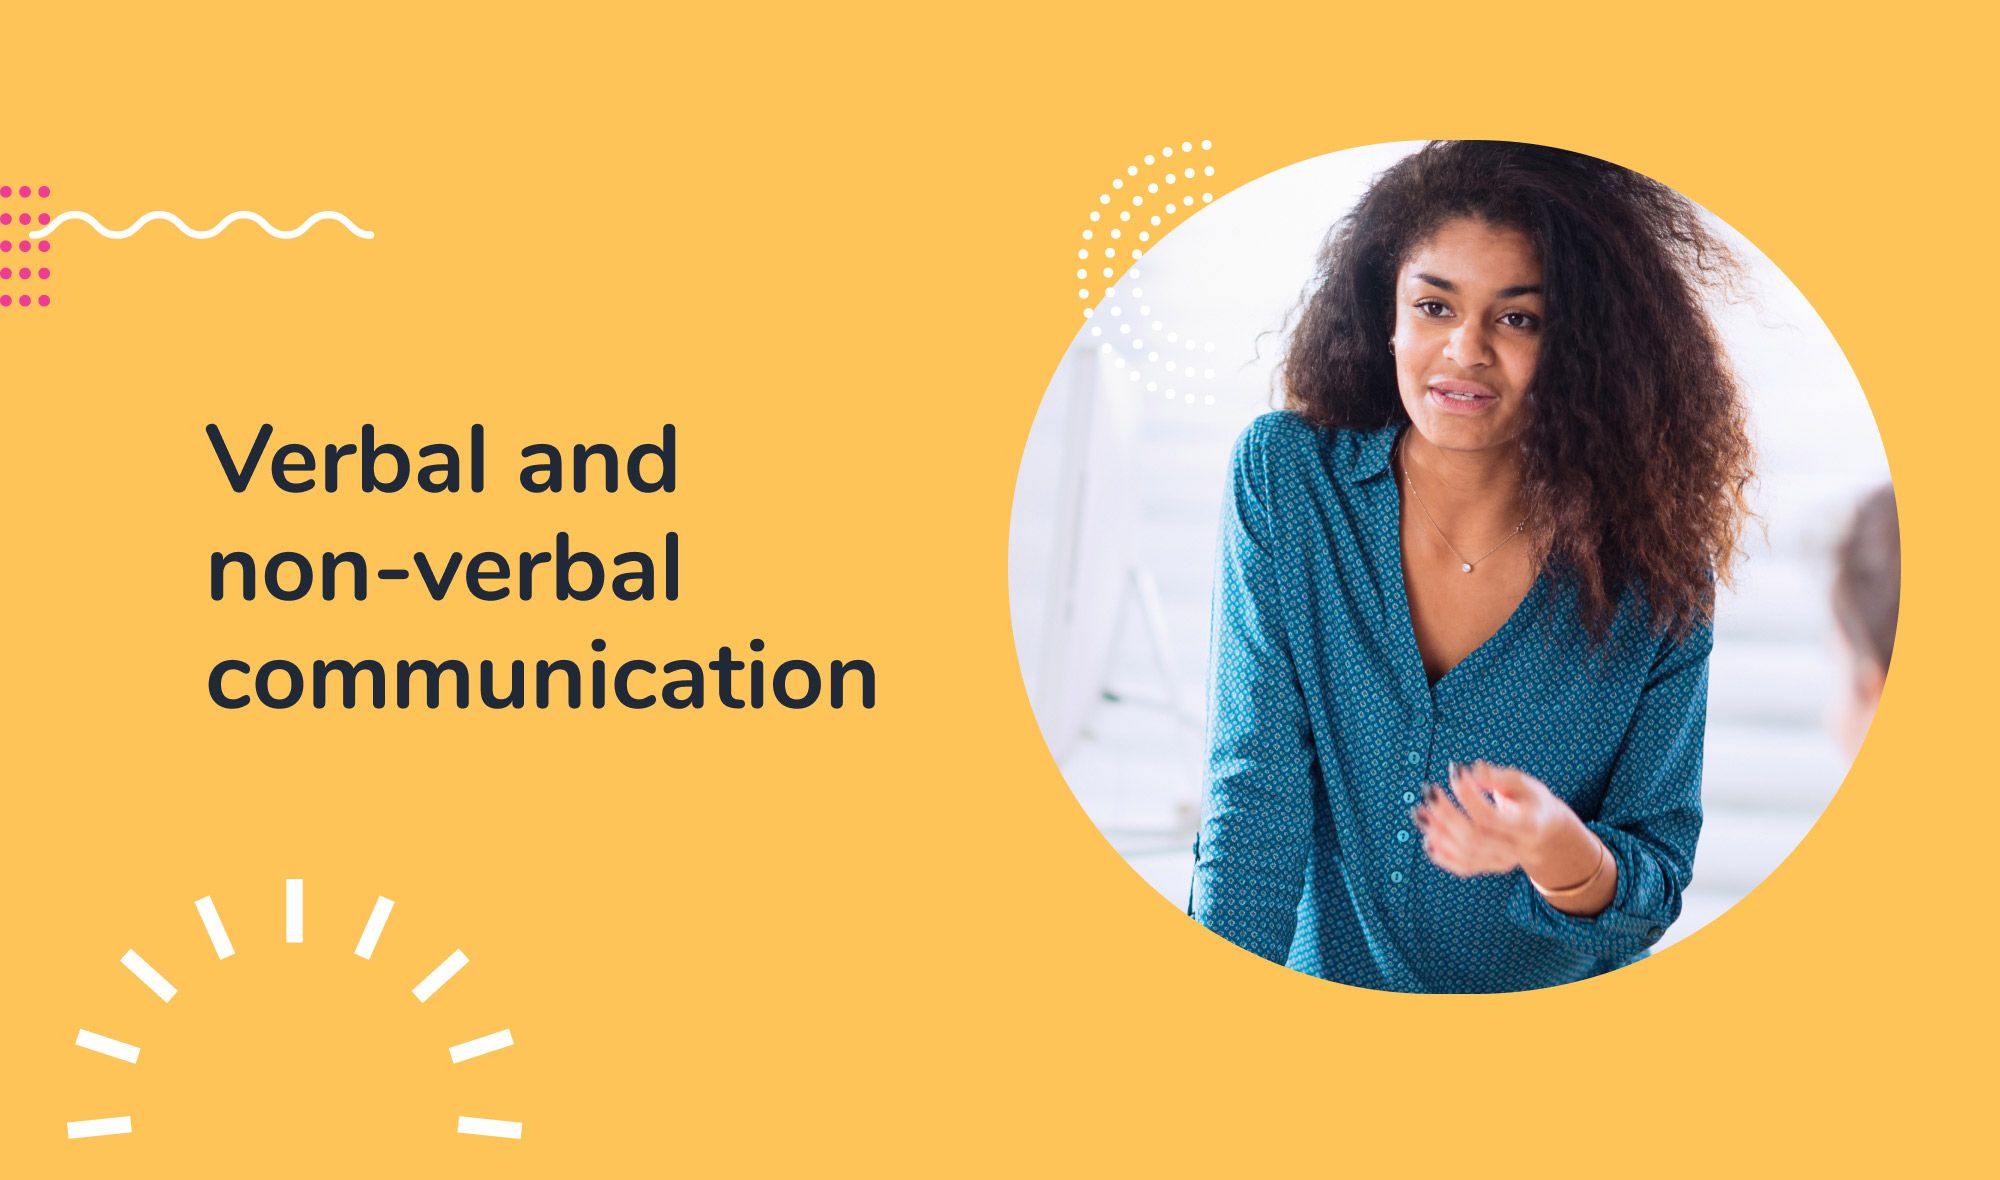 Difference between verbal and non-verbal communication